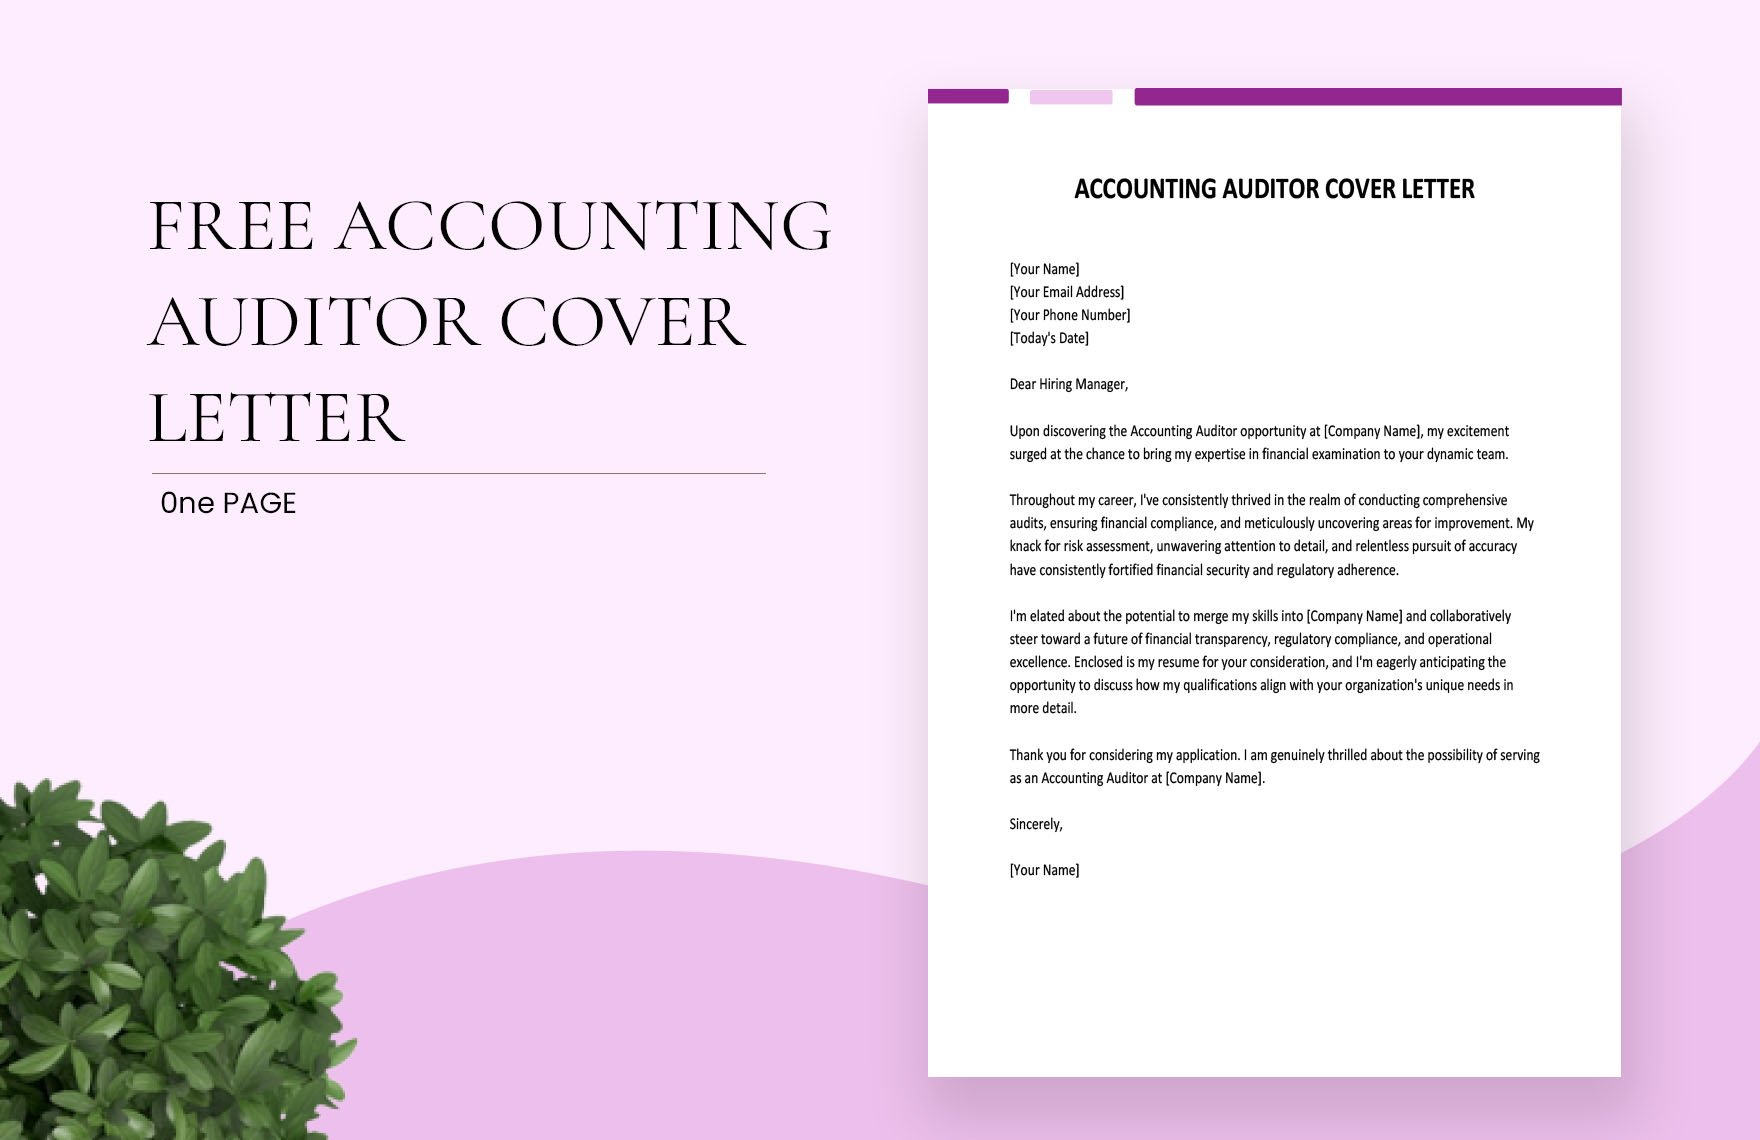 Accounting Auditor Cover Letter in Word, Google Docs